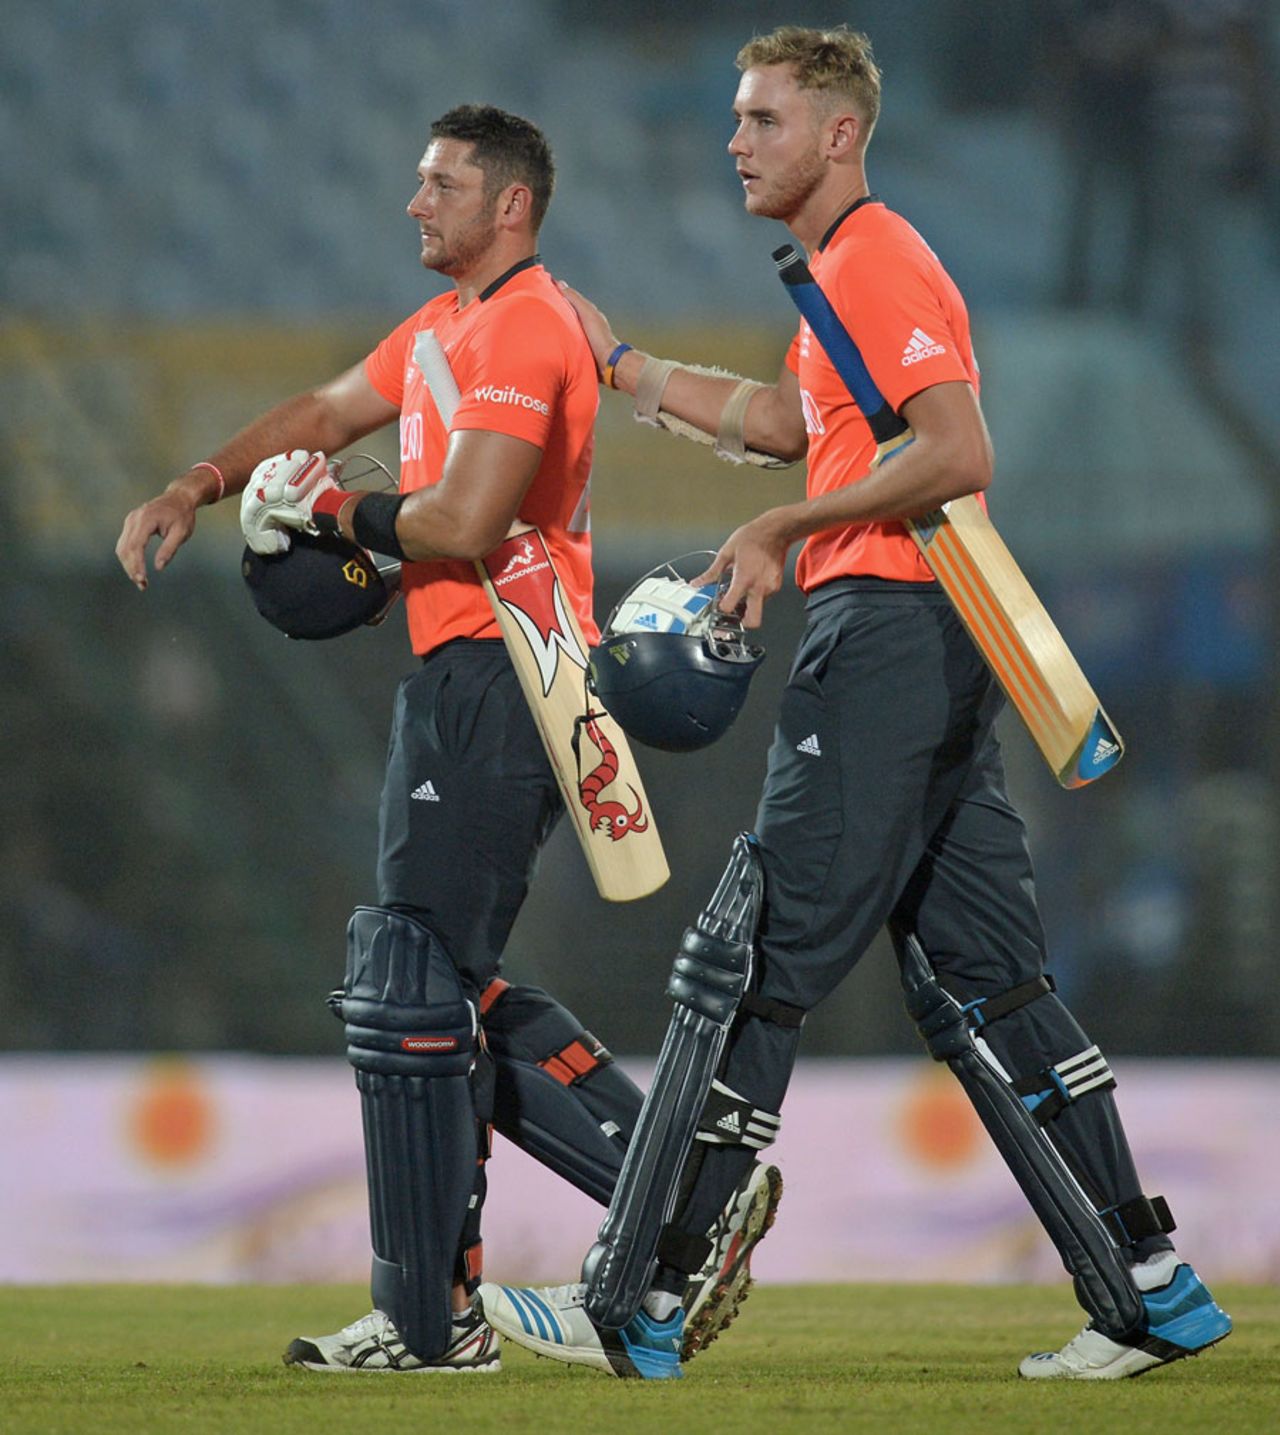 Tim Bresnan and Stuart Broad walk off after the match, England v South Africa, World Twenty20 2014, Group 1, Chittagong, March 29, 2014